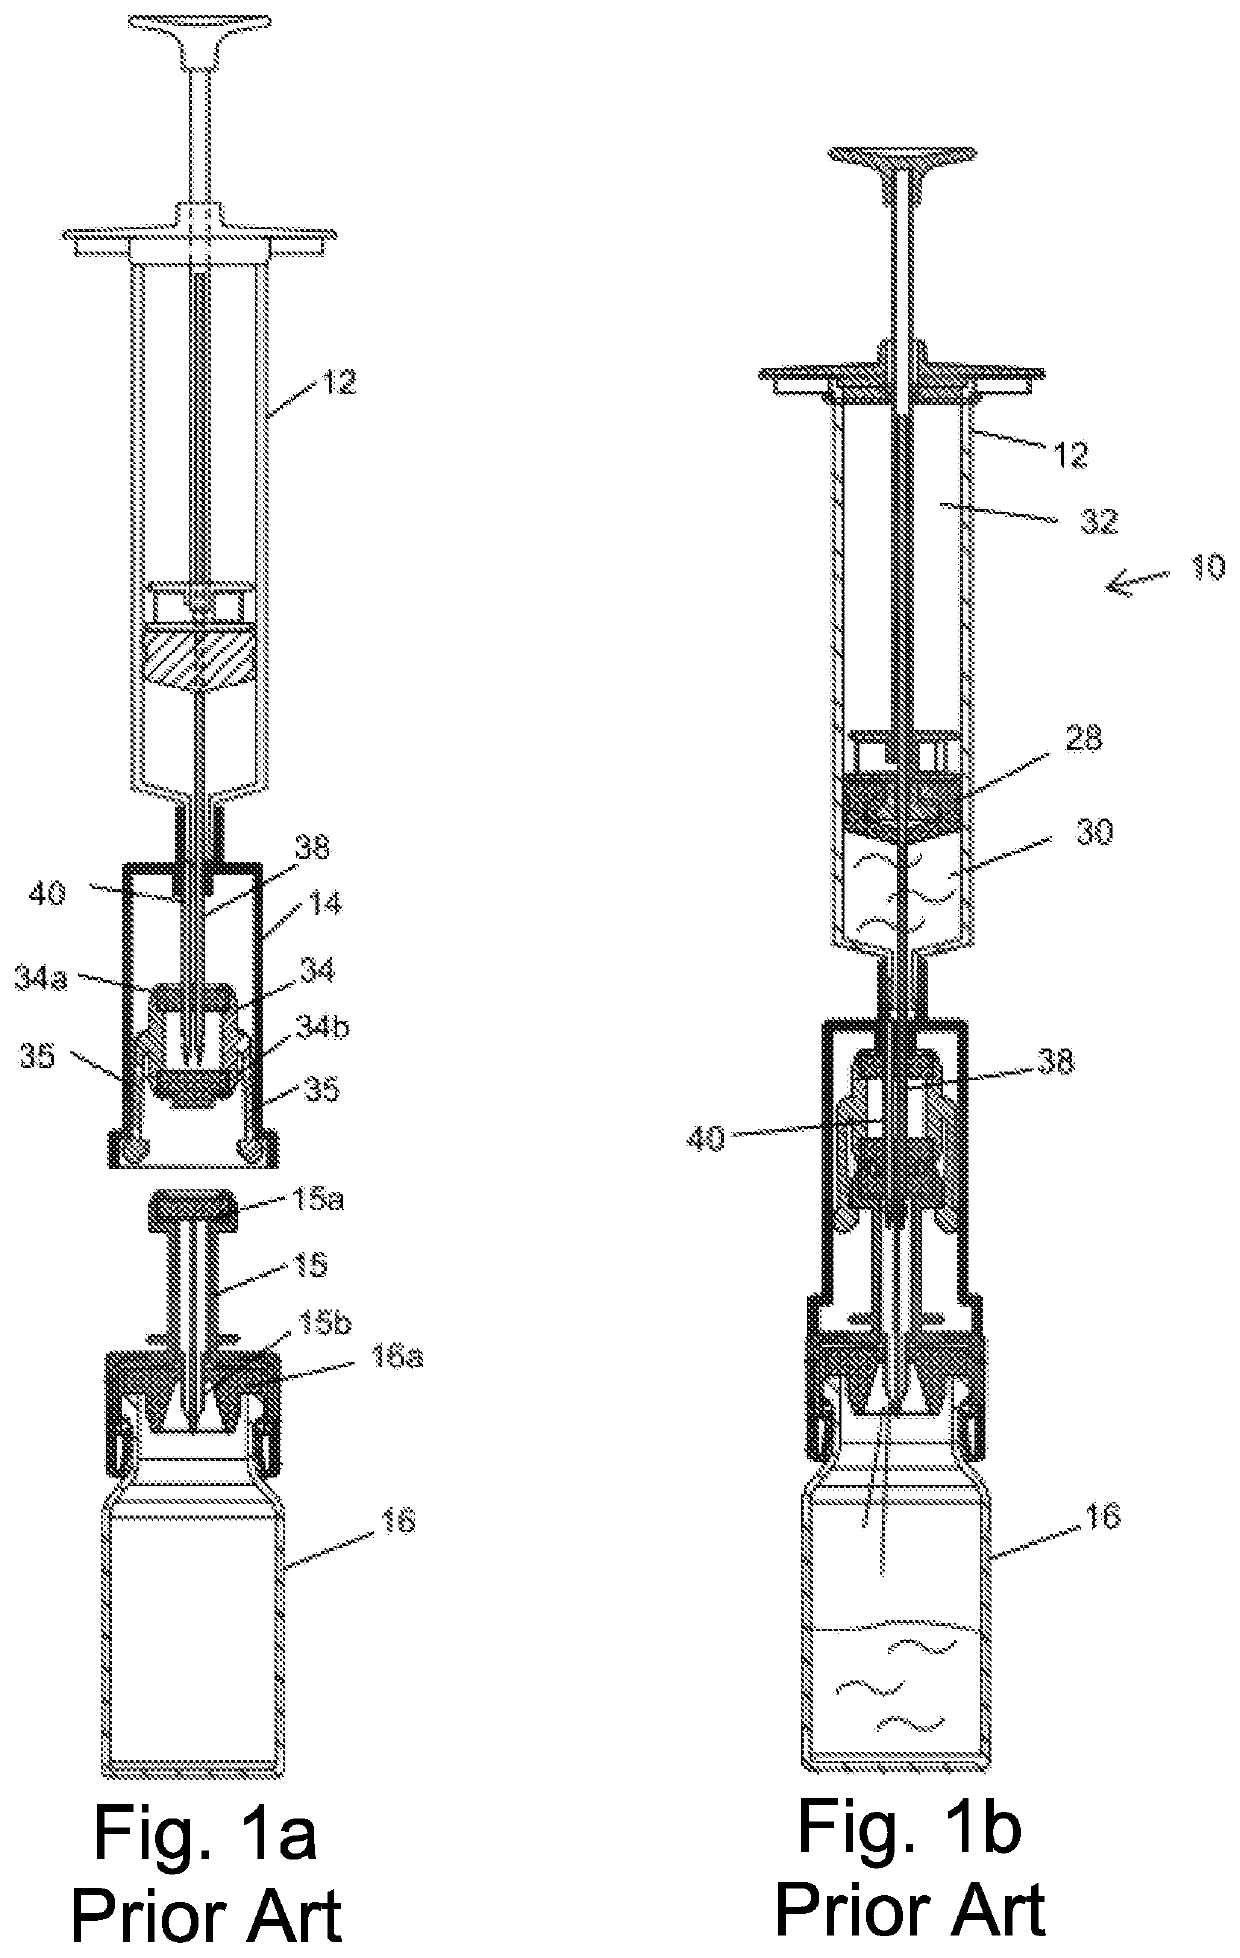 Components of open liquid drug transfer systems and a robotic system employing them